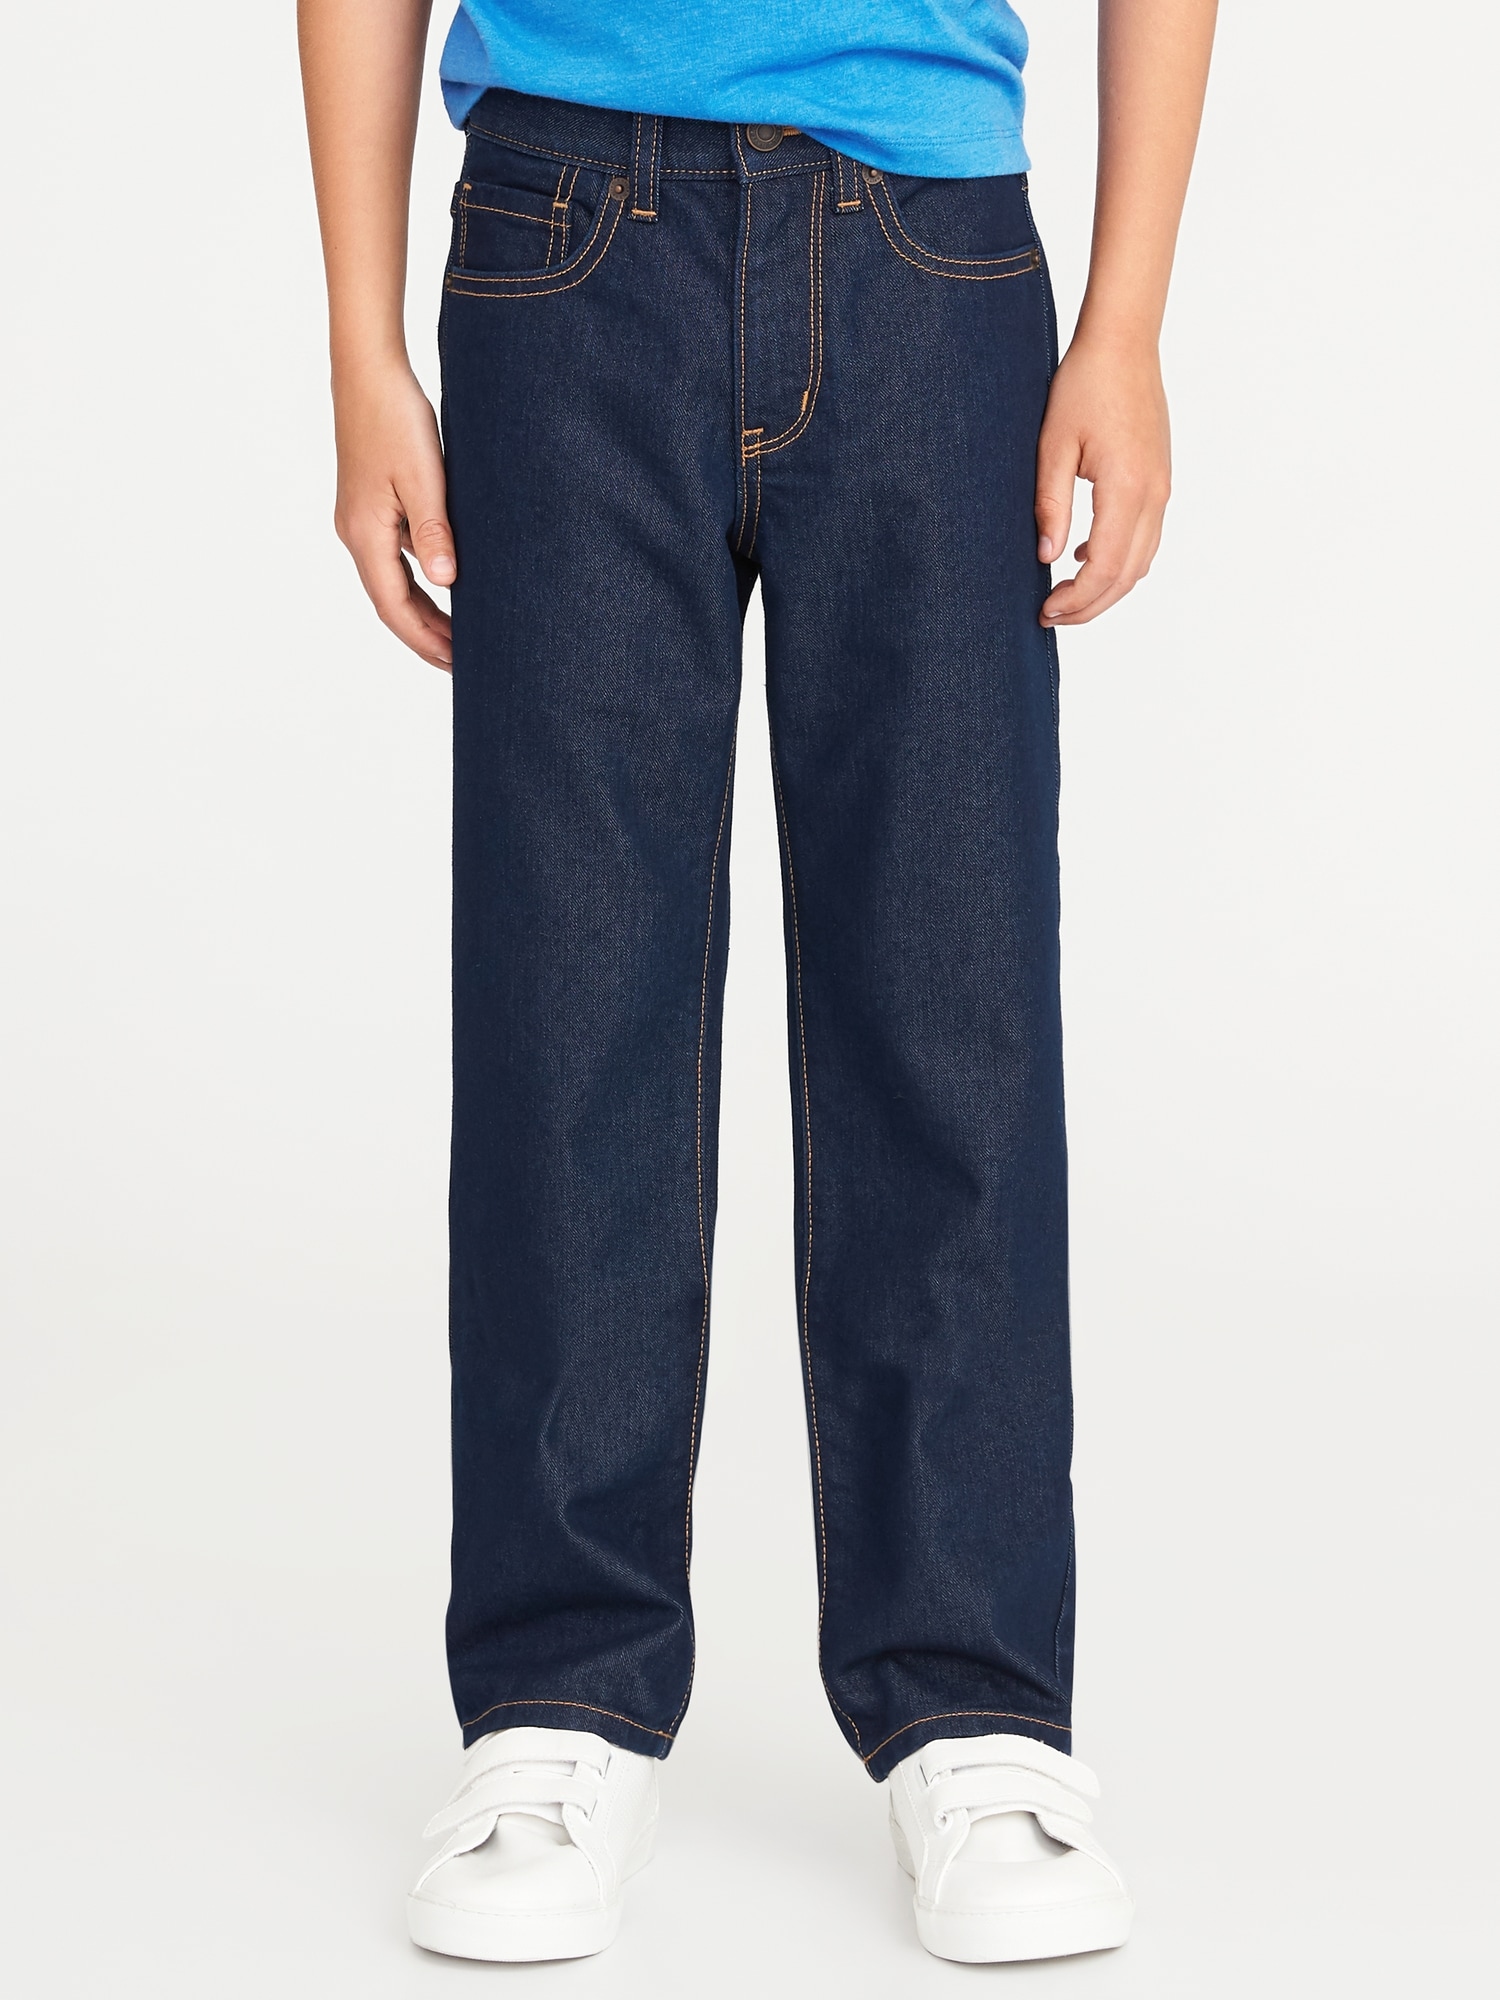 Straight Non-Stretch Jeans for Boys